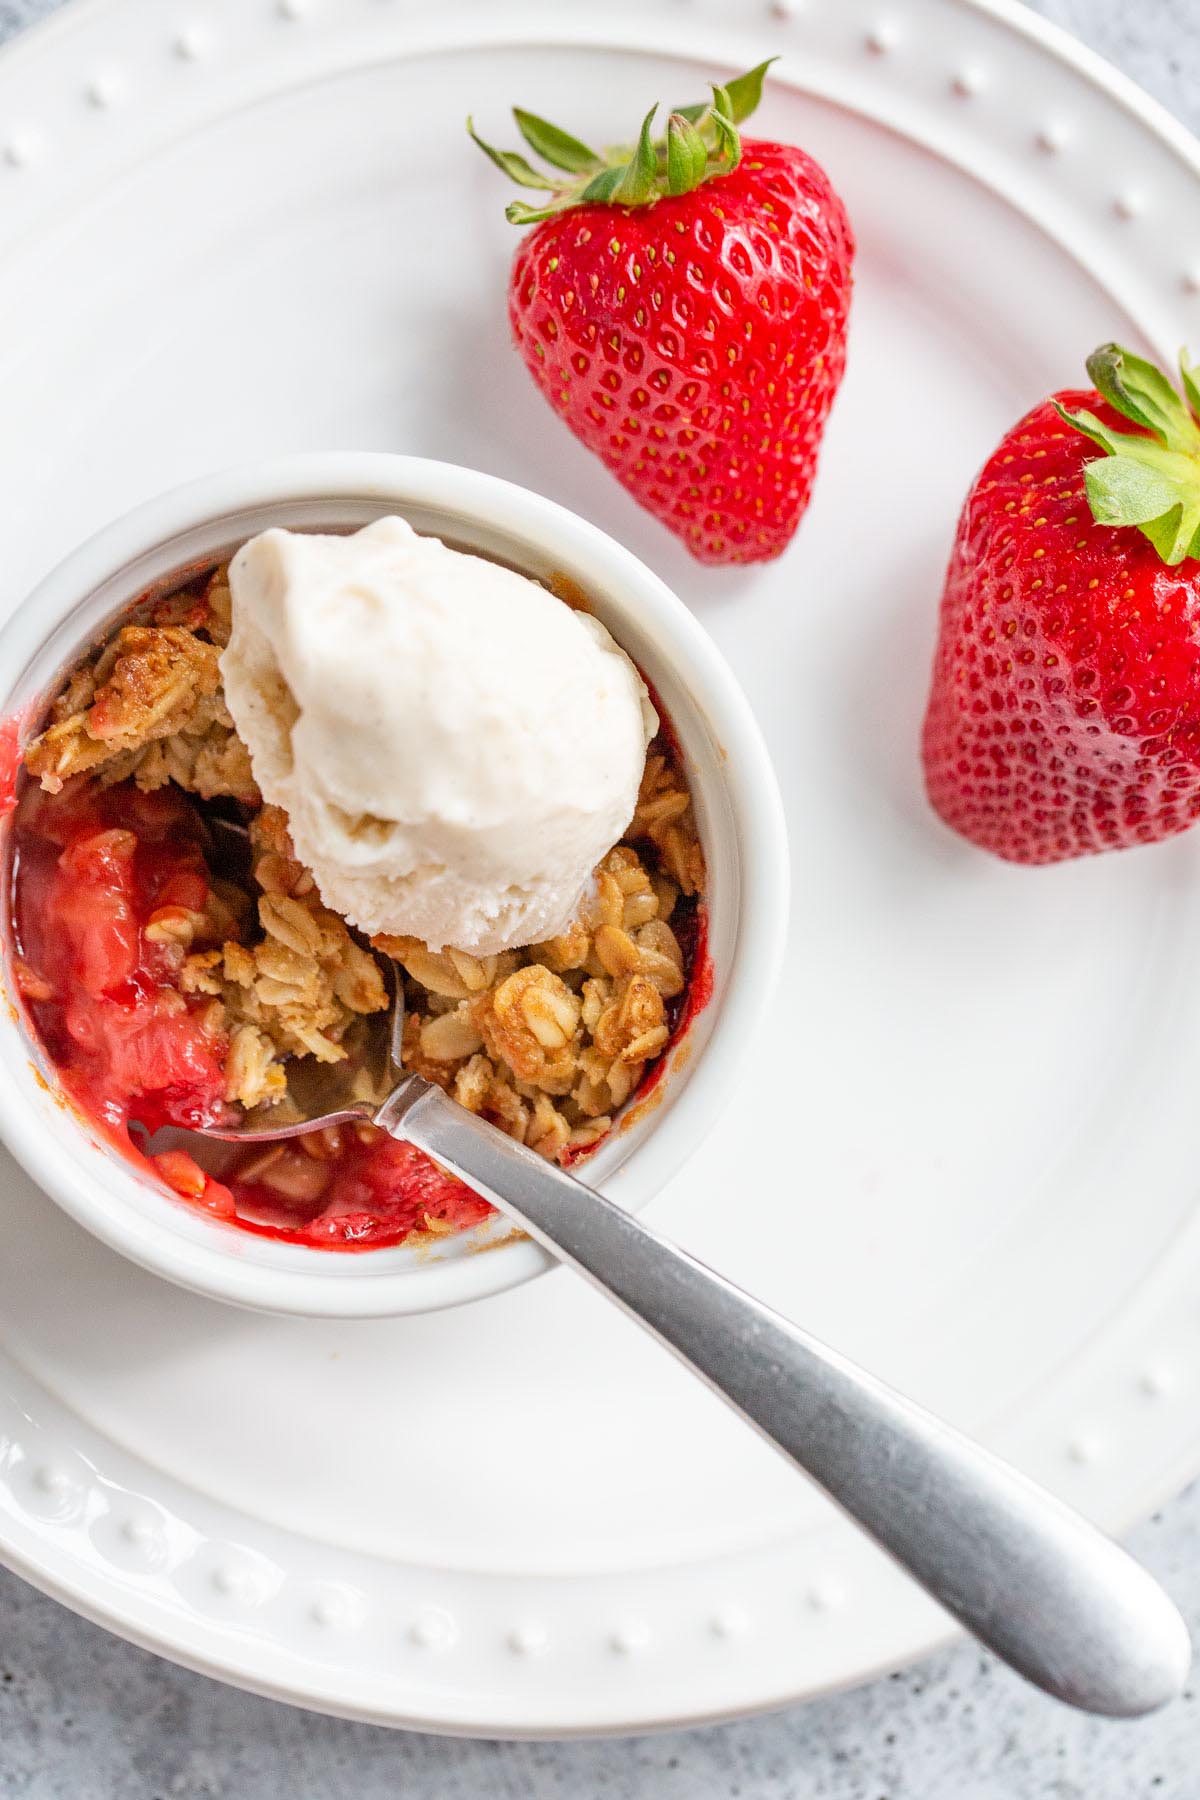 Air fryer strawberry crisp with a scoop of ice cream.